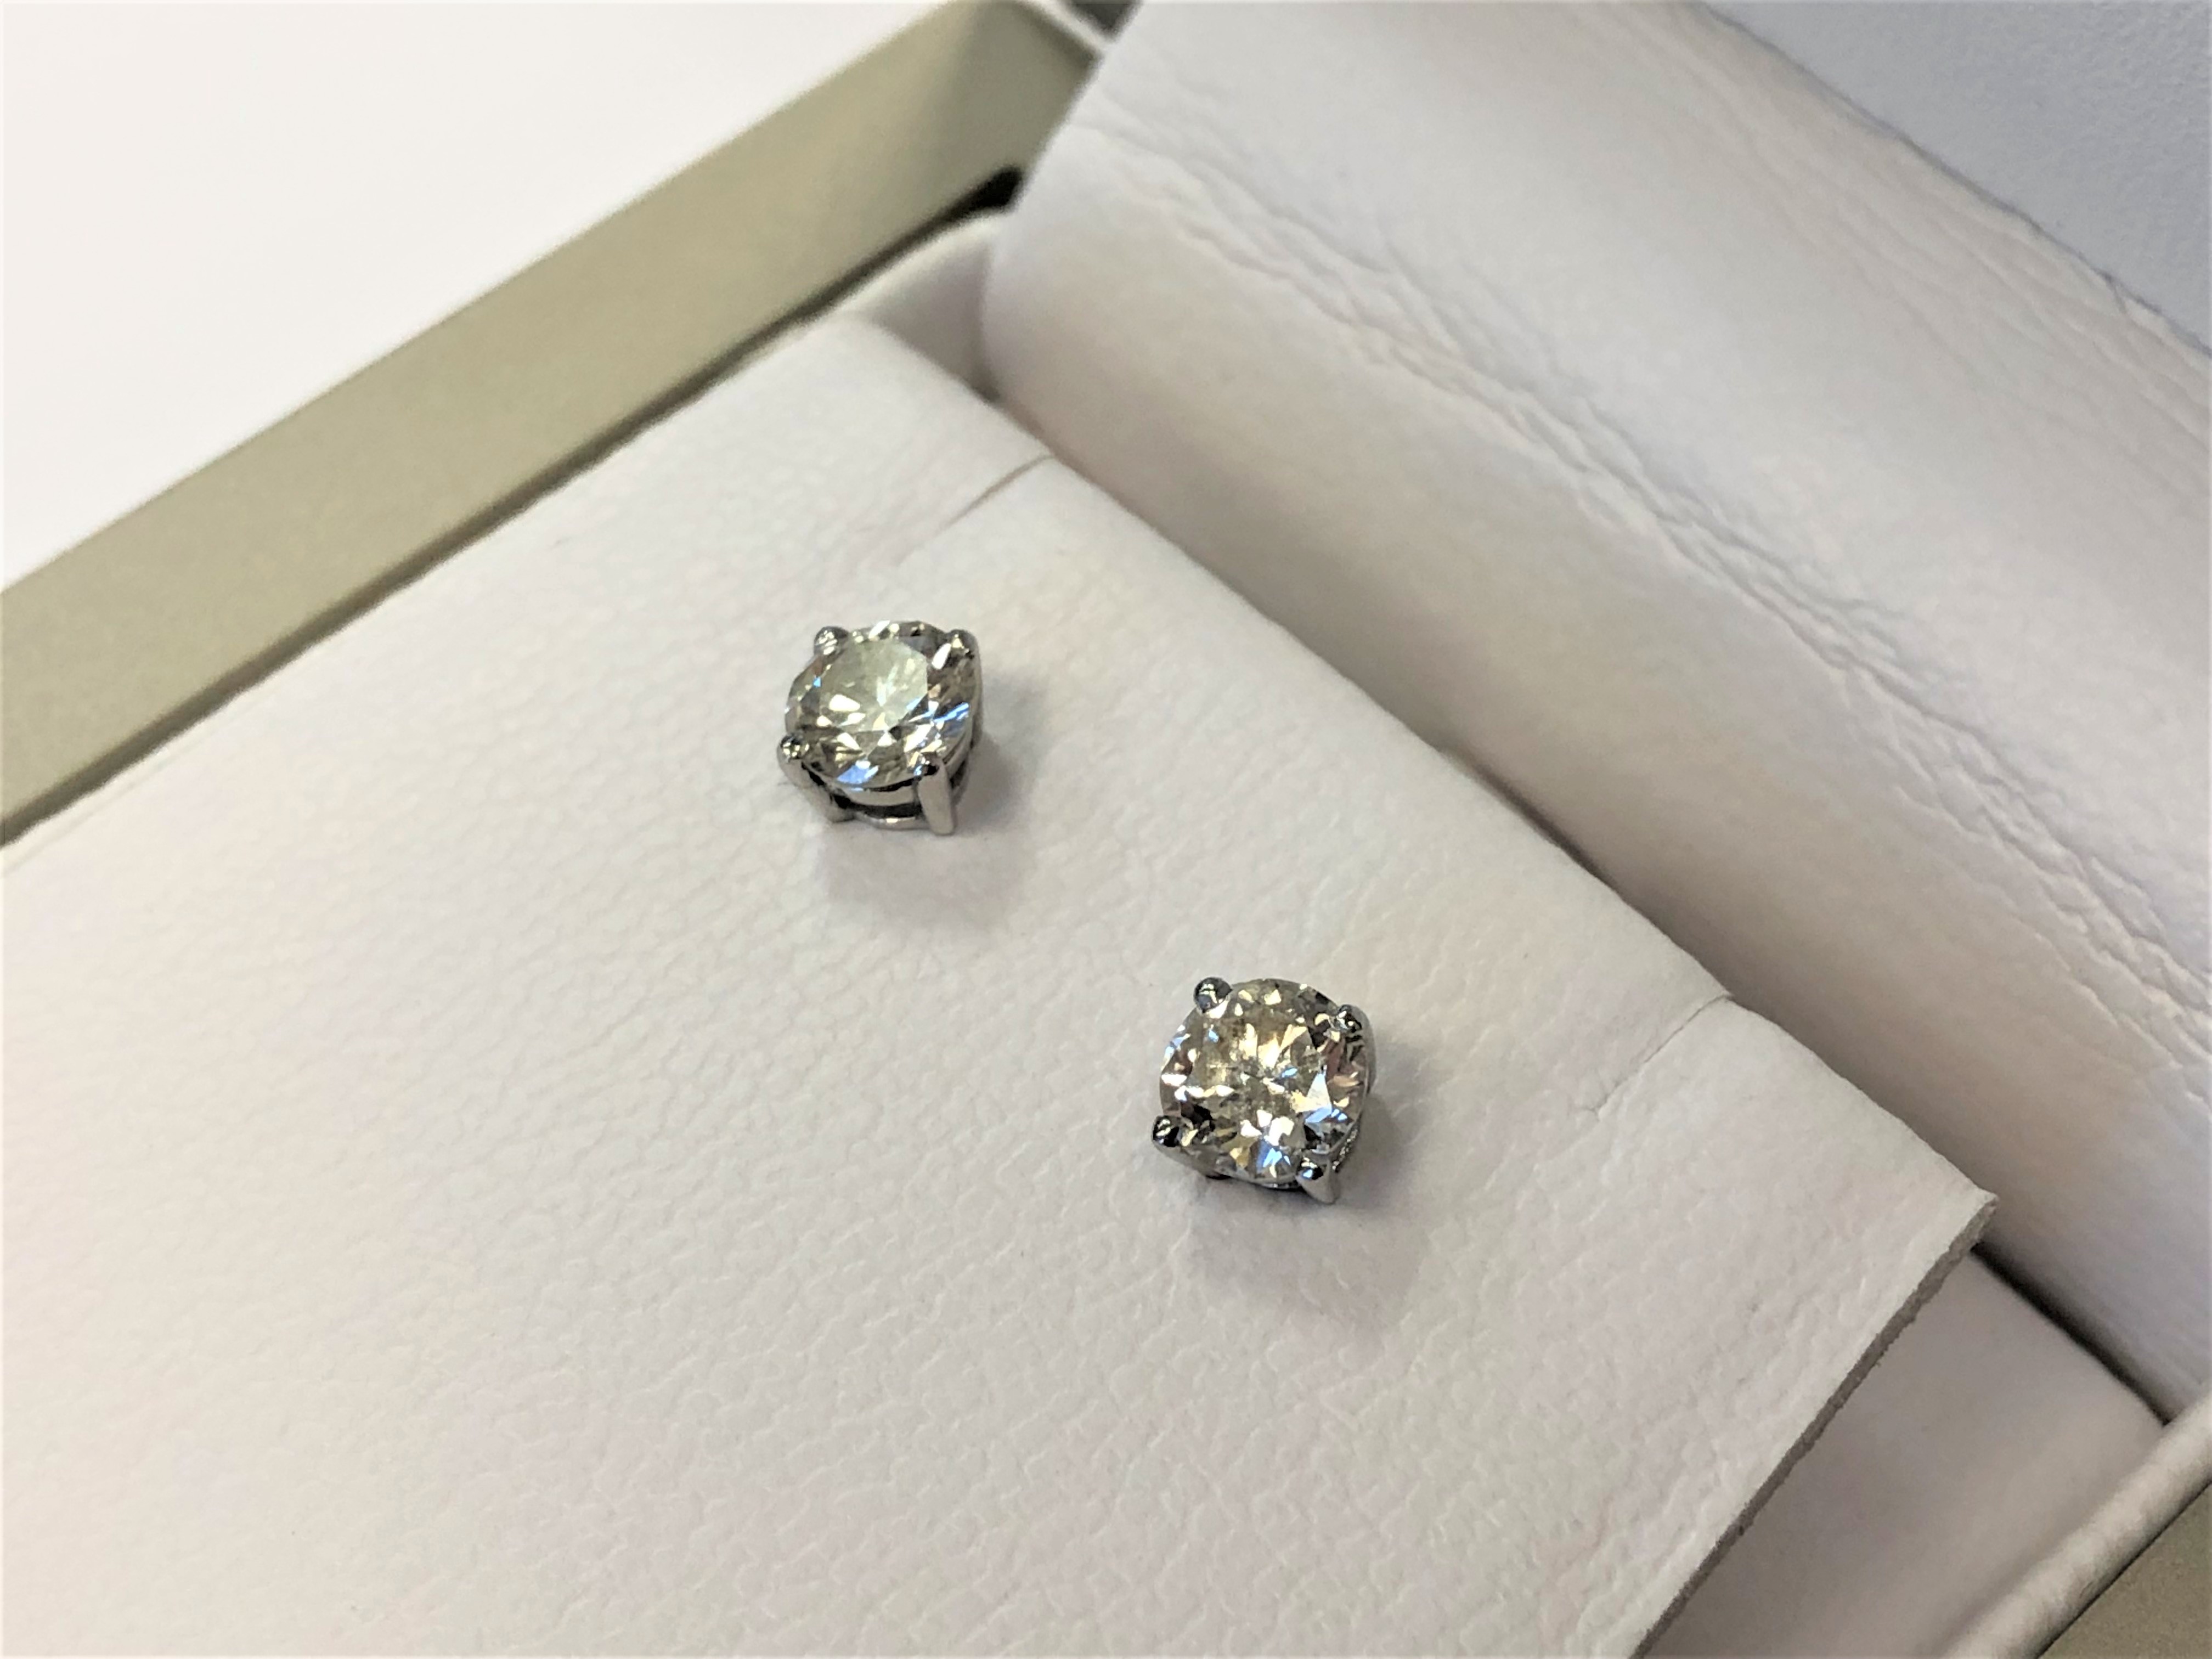 A pair of 18ct white gold diamond solitaire earrings,